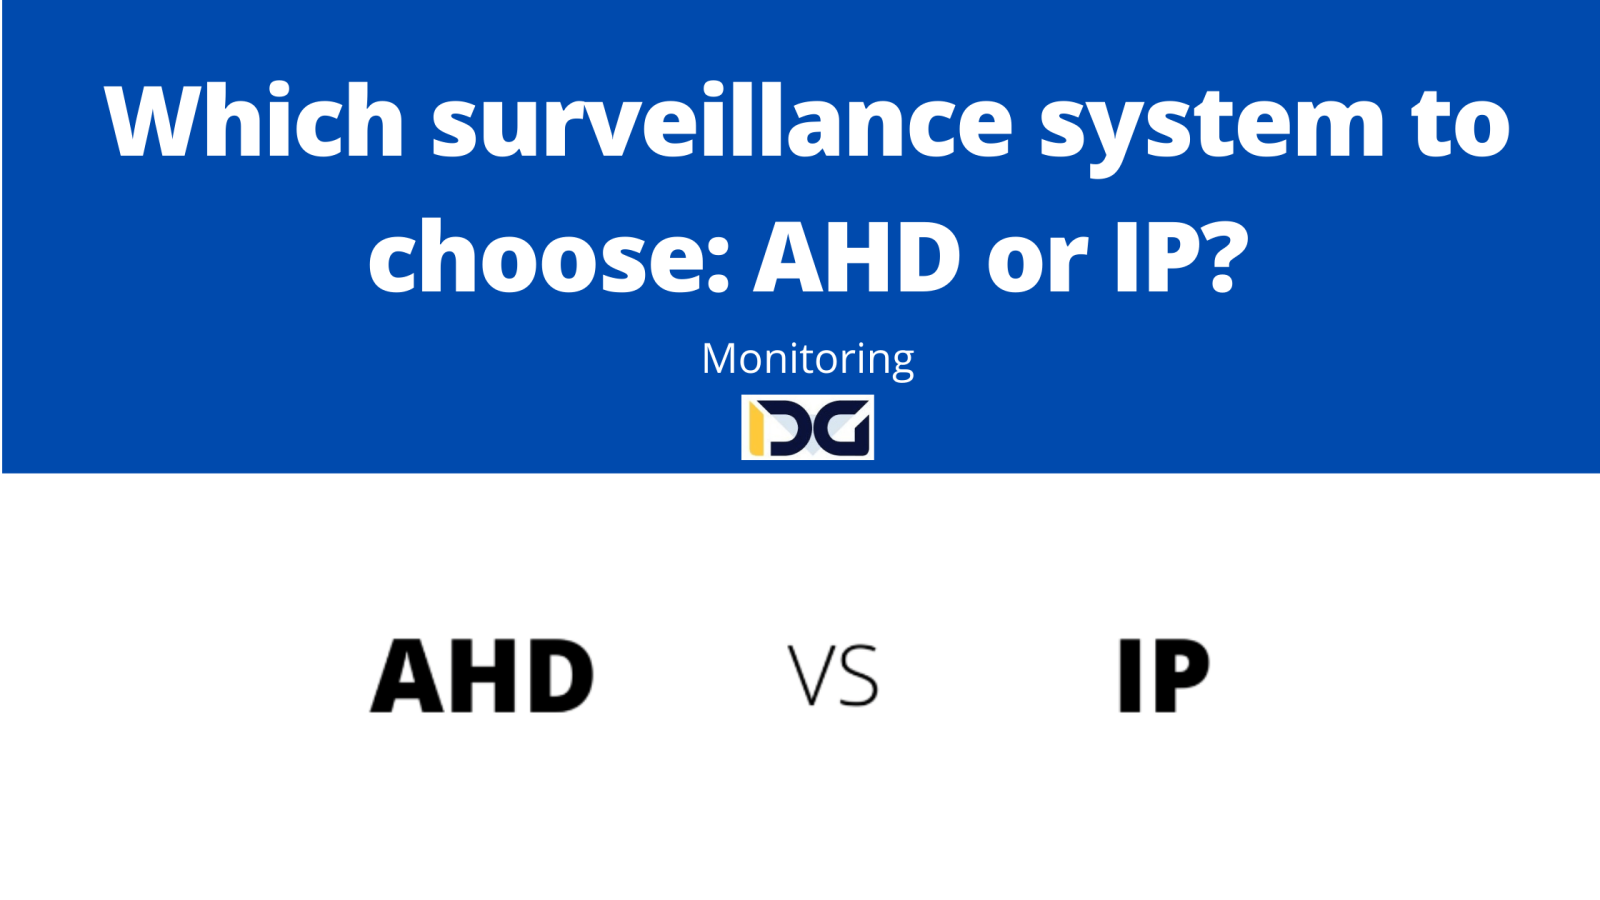 Which surveillance system to choose: AHD or IP?